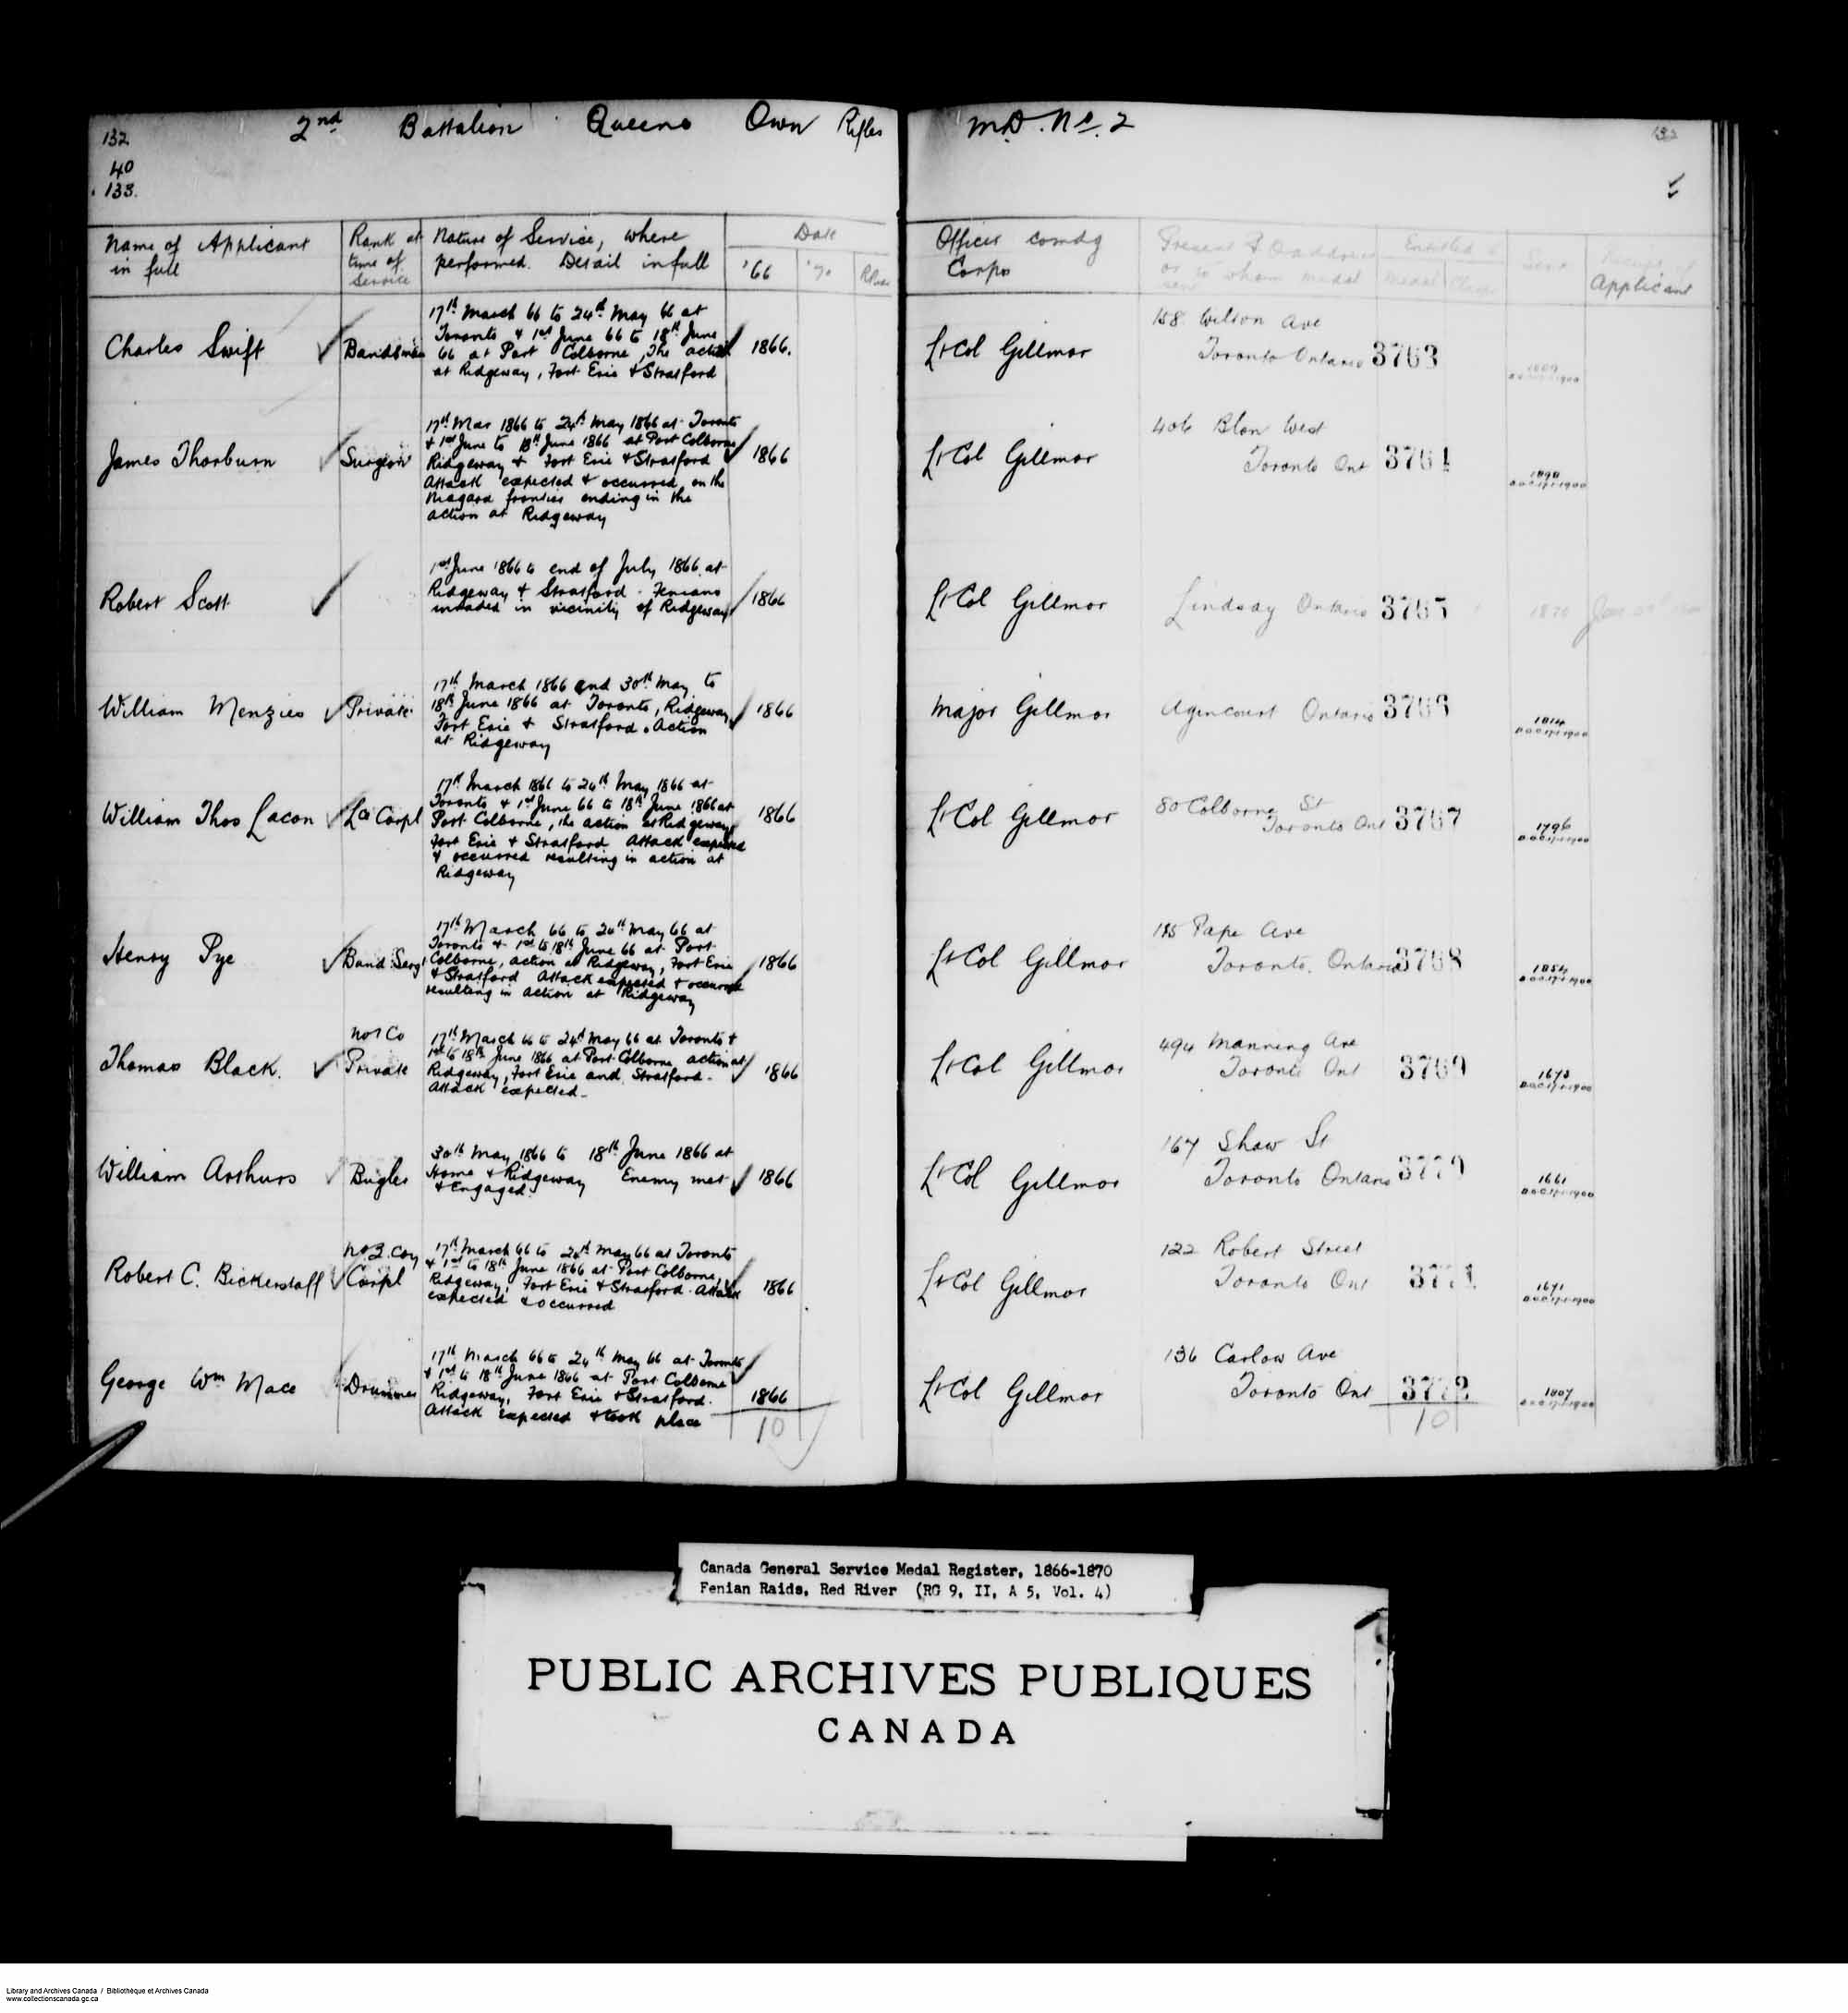 Digitized page of Medals, Honours and Awards for Image No.: e008681819